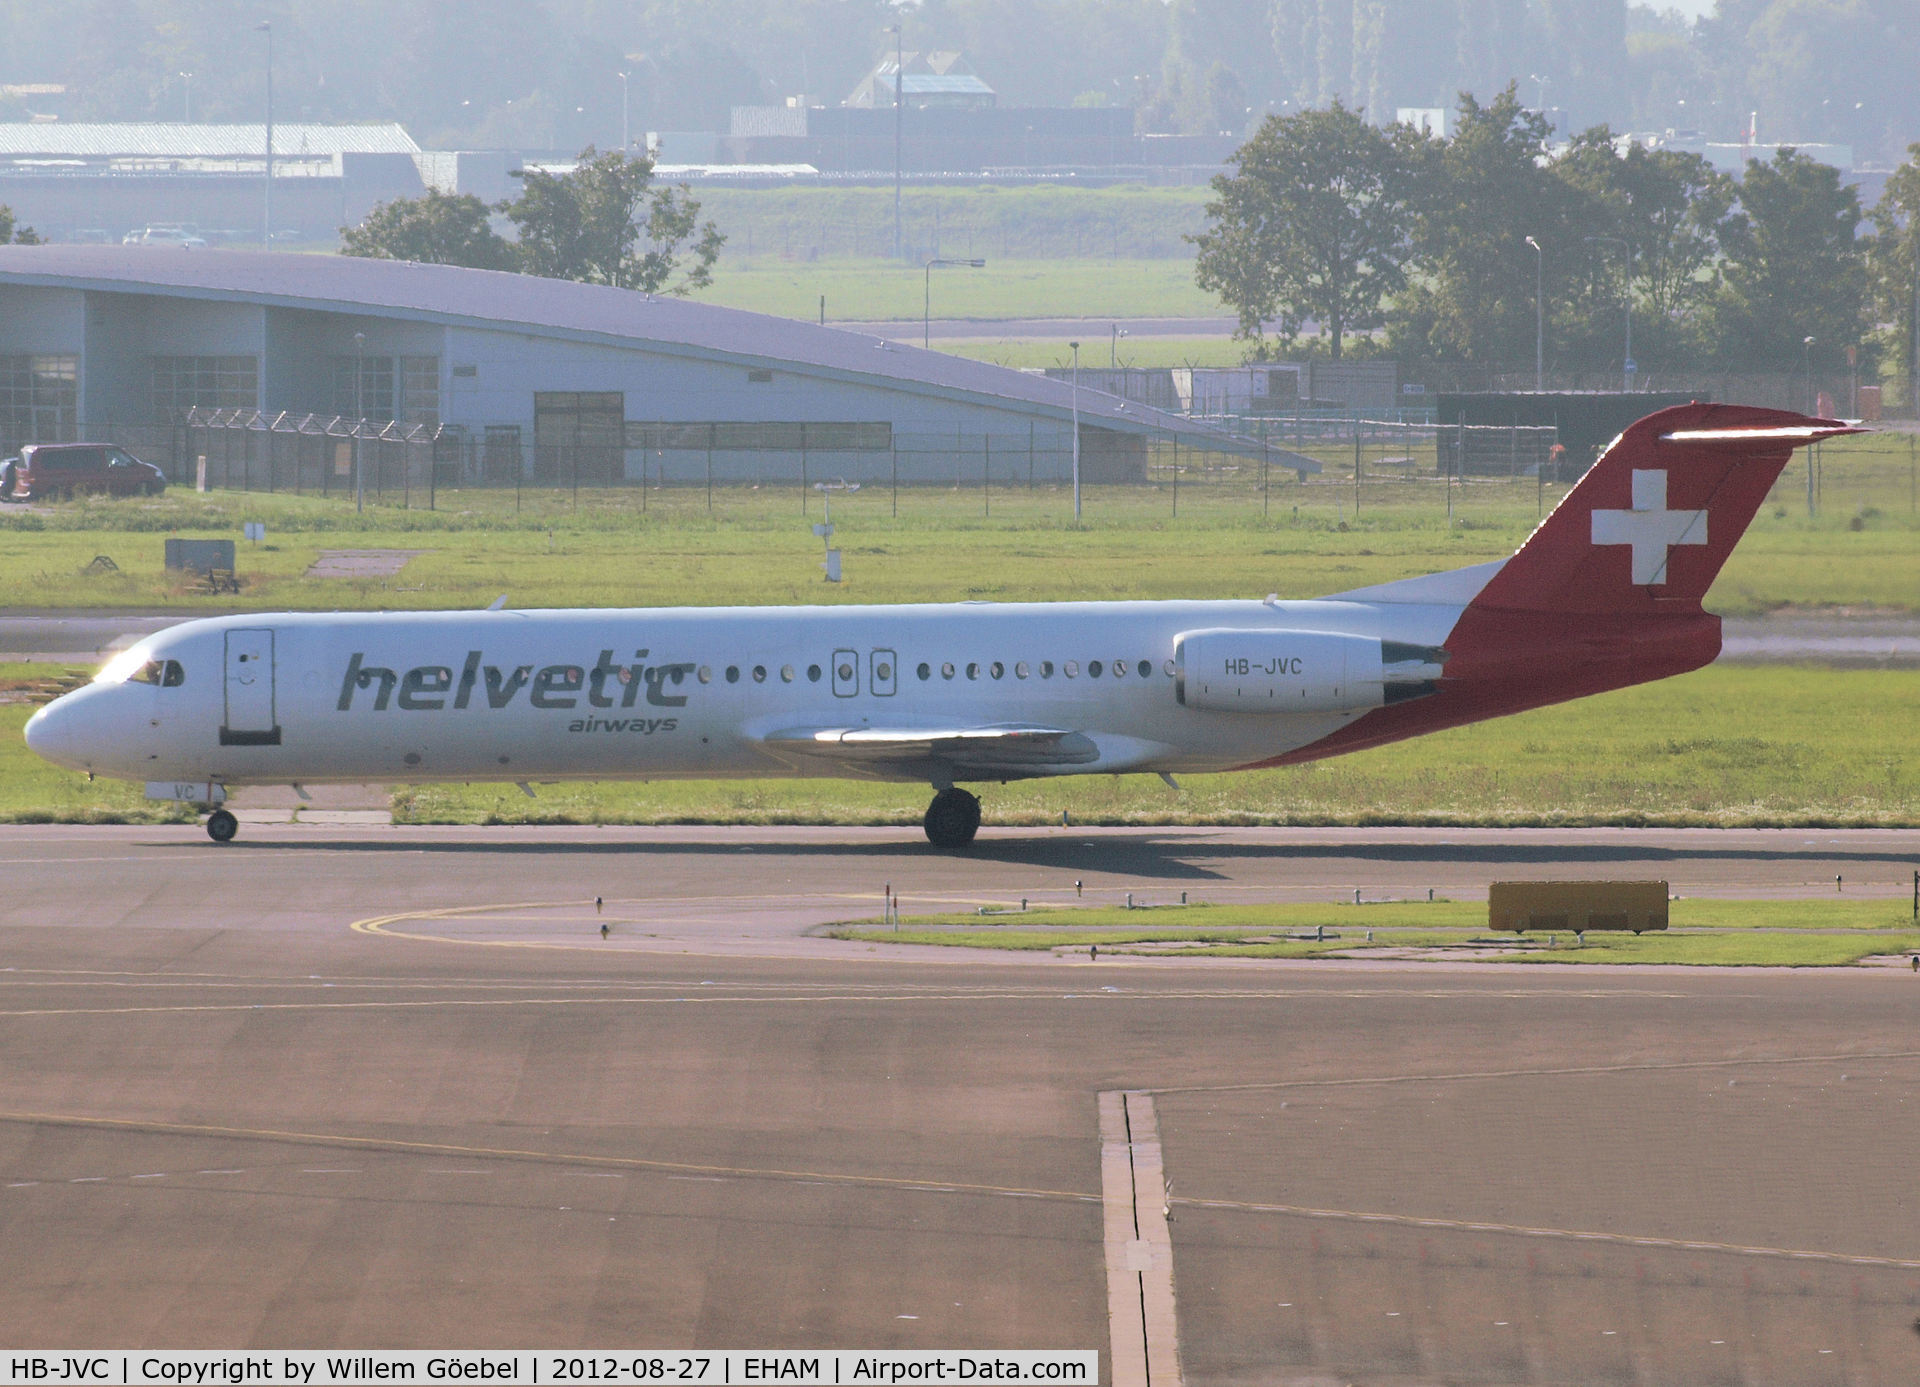 HB-JVC, 1994 Fokker 100 (F-28-0100) C/N 11501, Taxi to runway 24 of Schiphol Airport for take off.